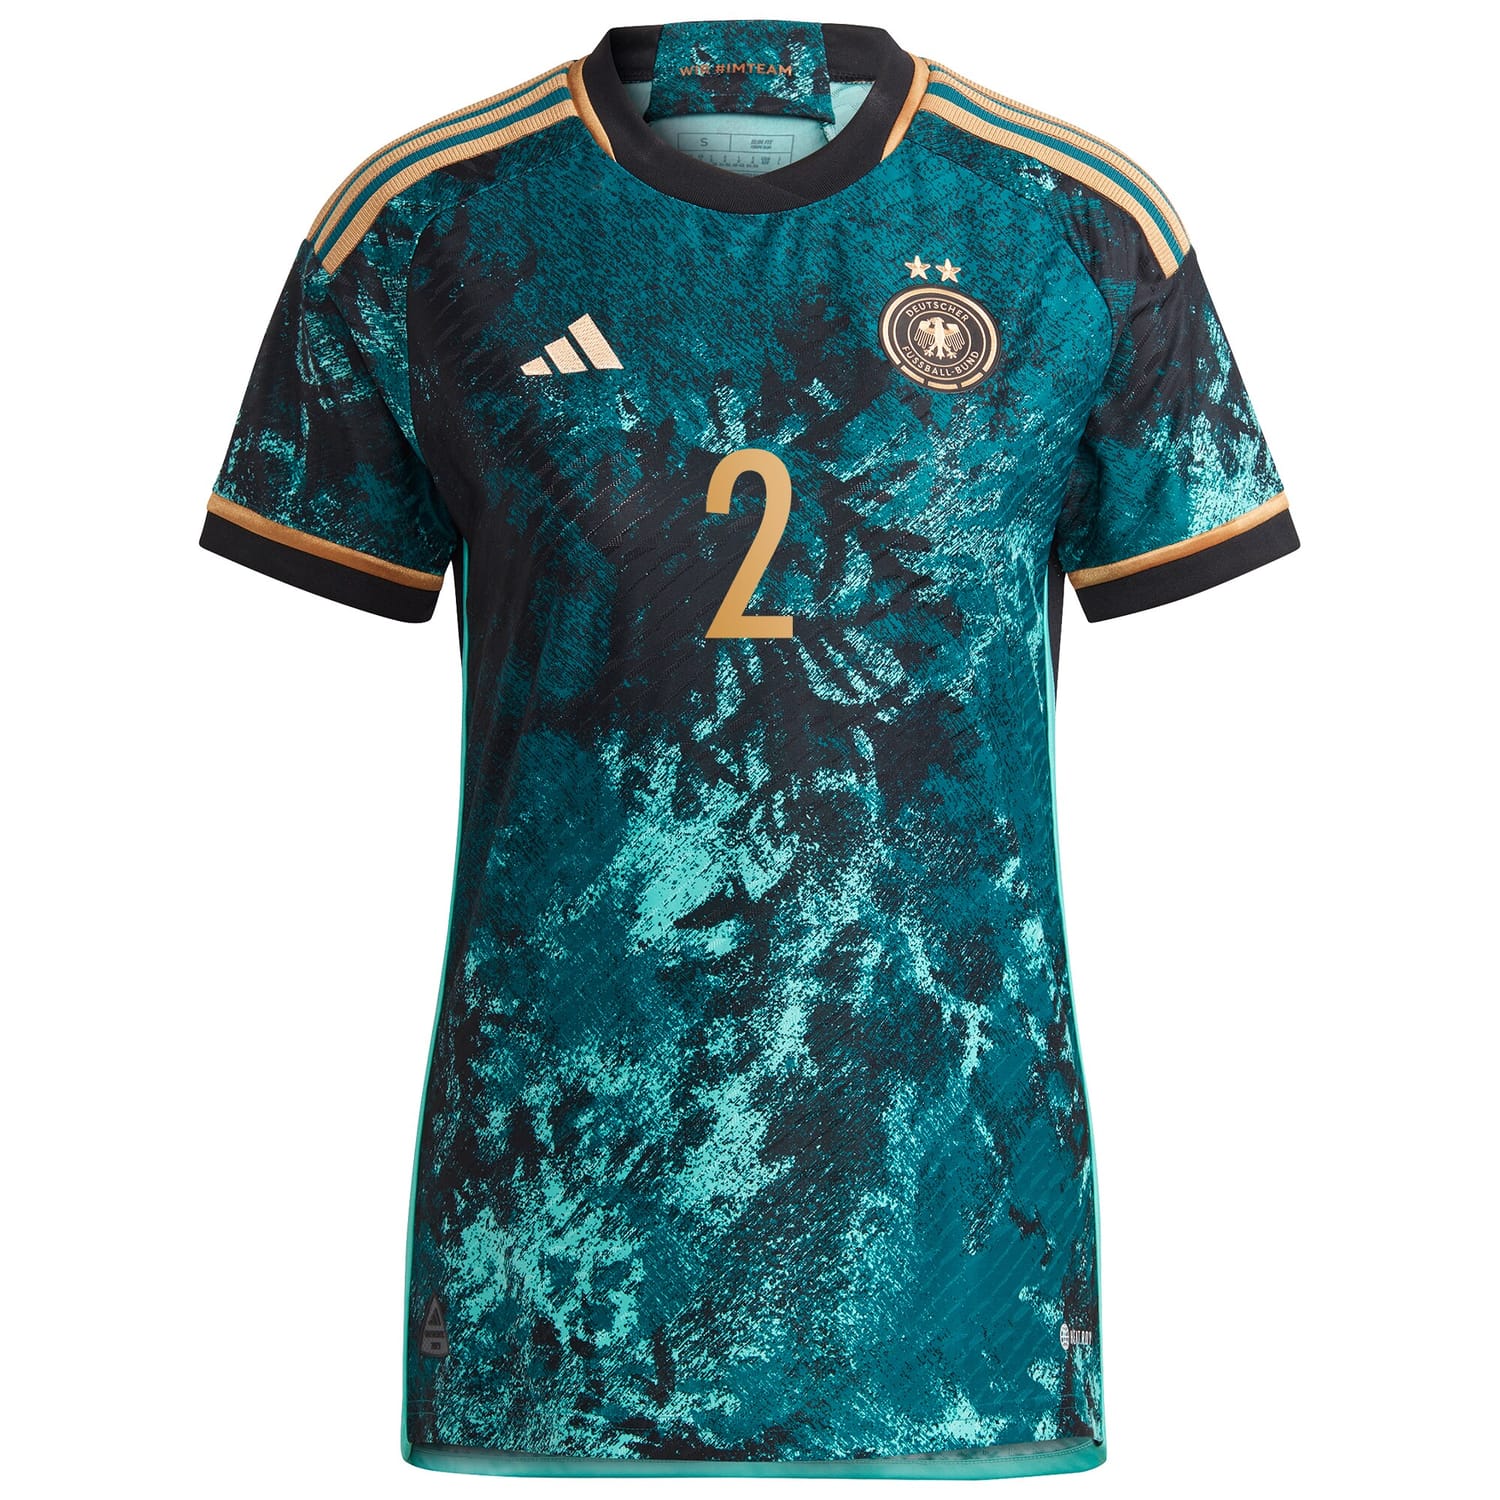 Germany National Team Away Authentic Jersey Shirt 2023 player Chantal Hagel 26 printing for Women